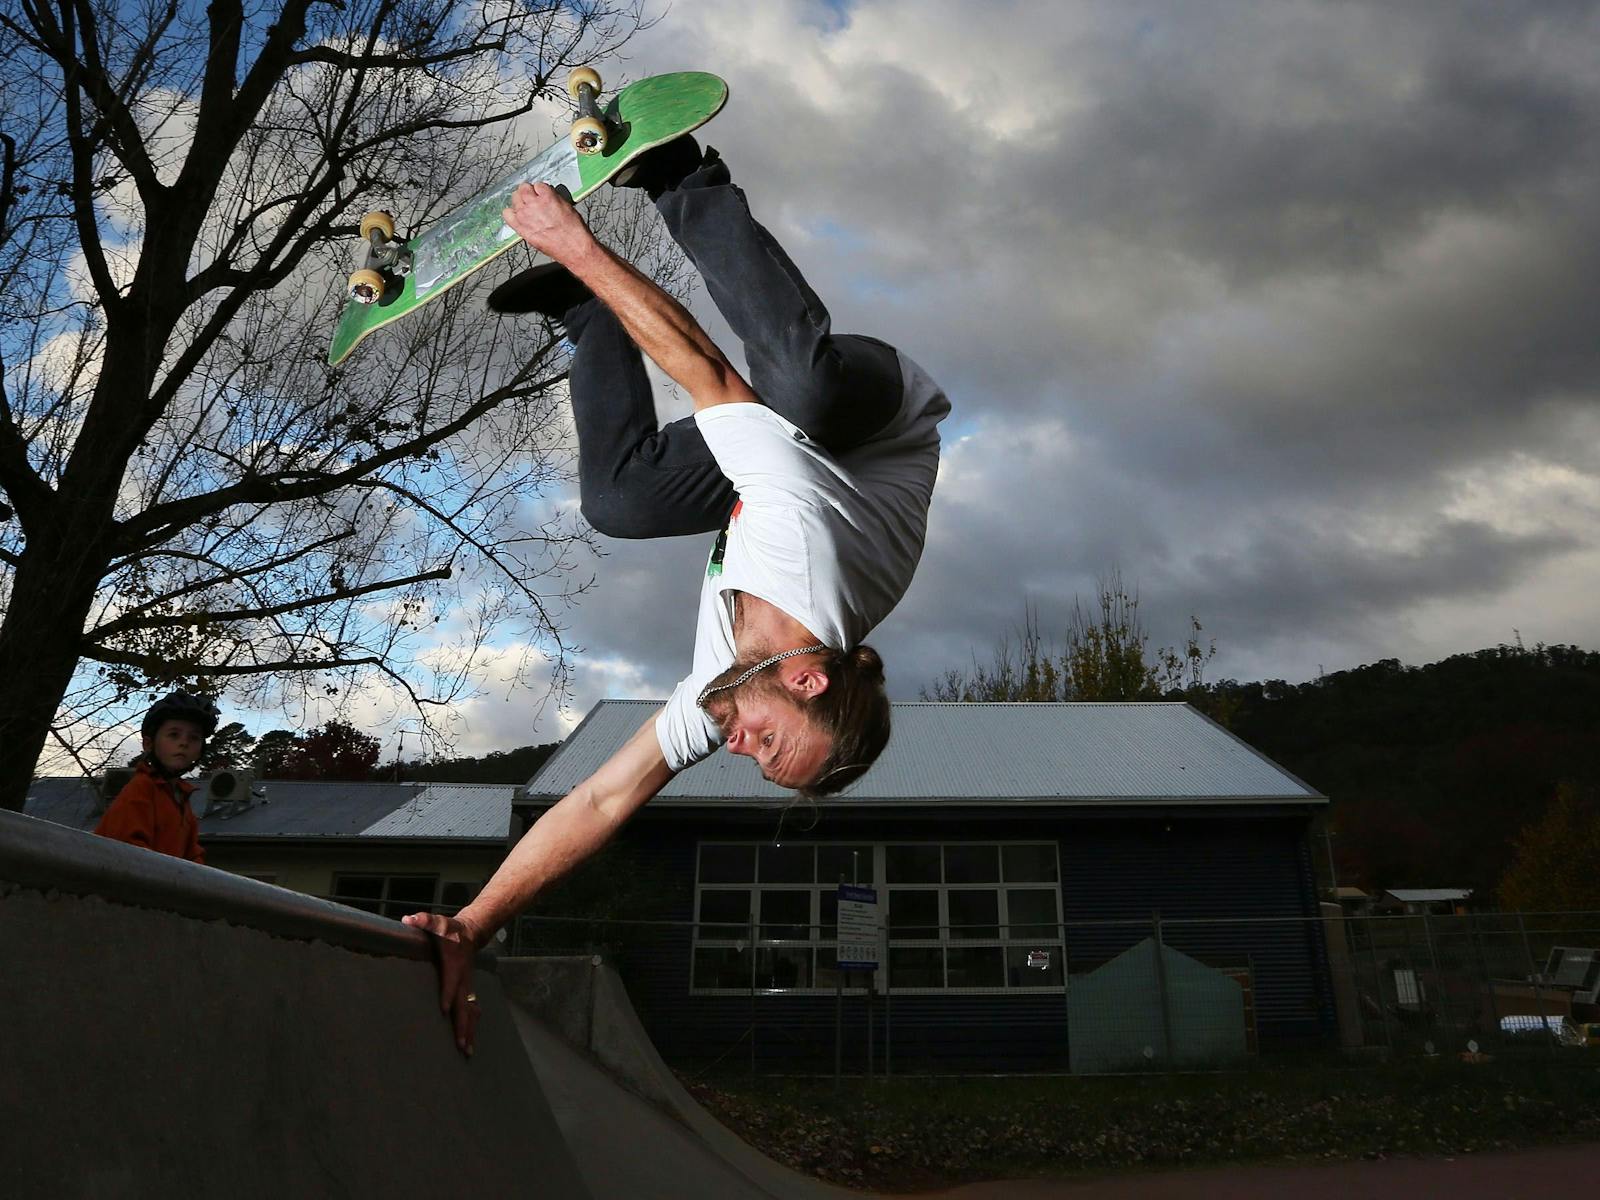 Image for North East Skate Park Series - Bright